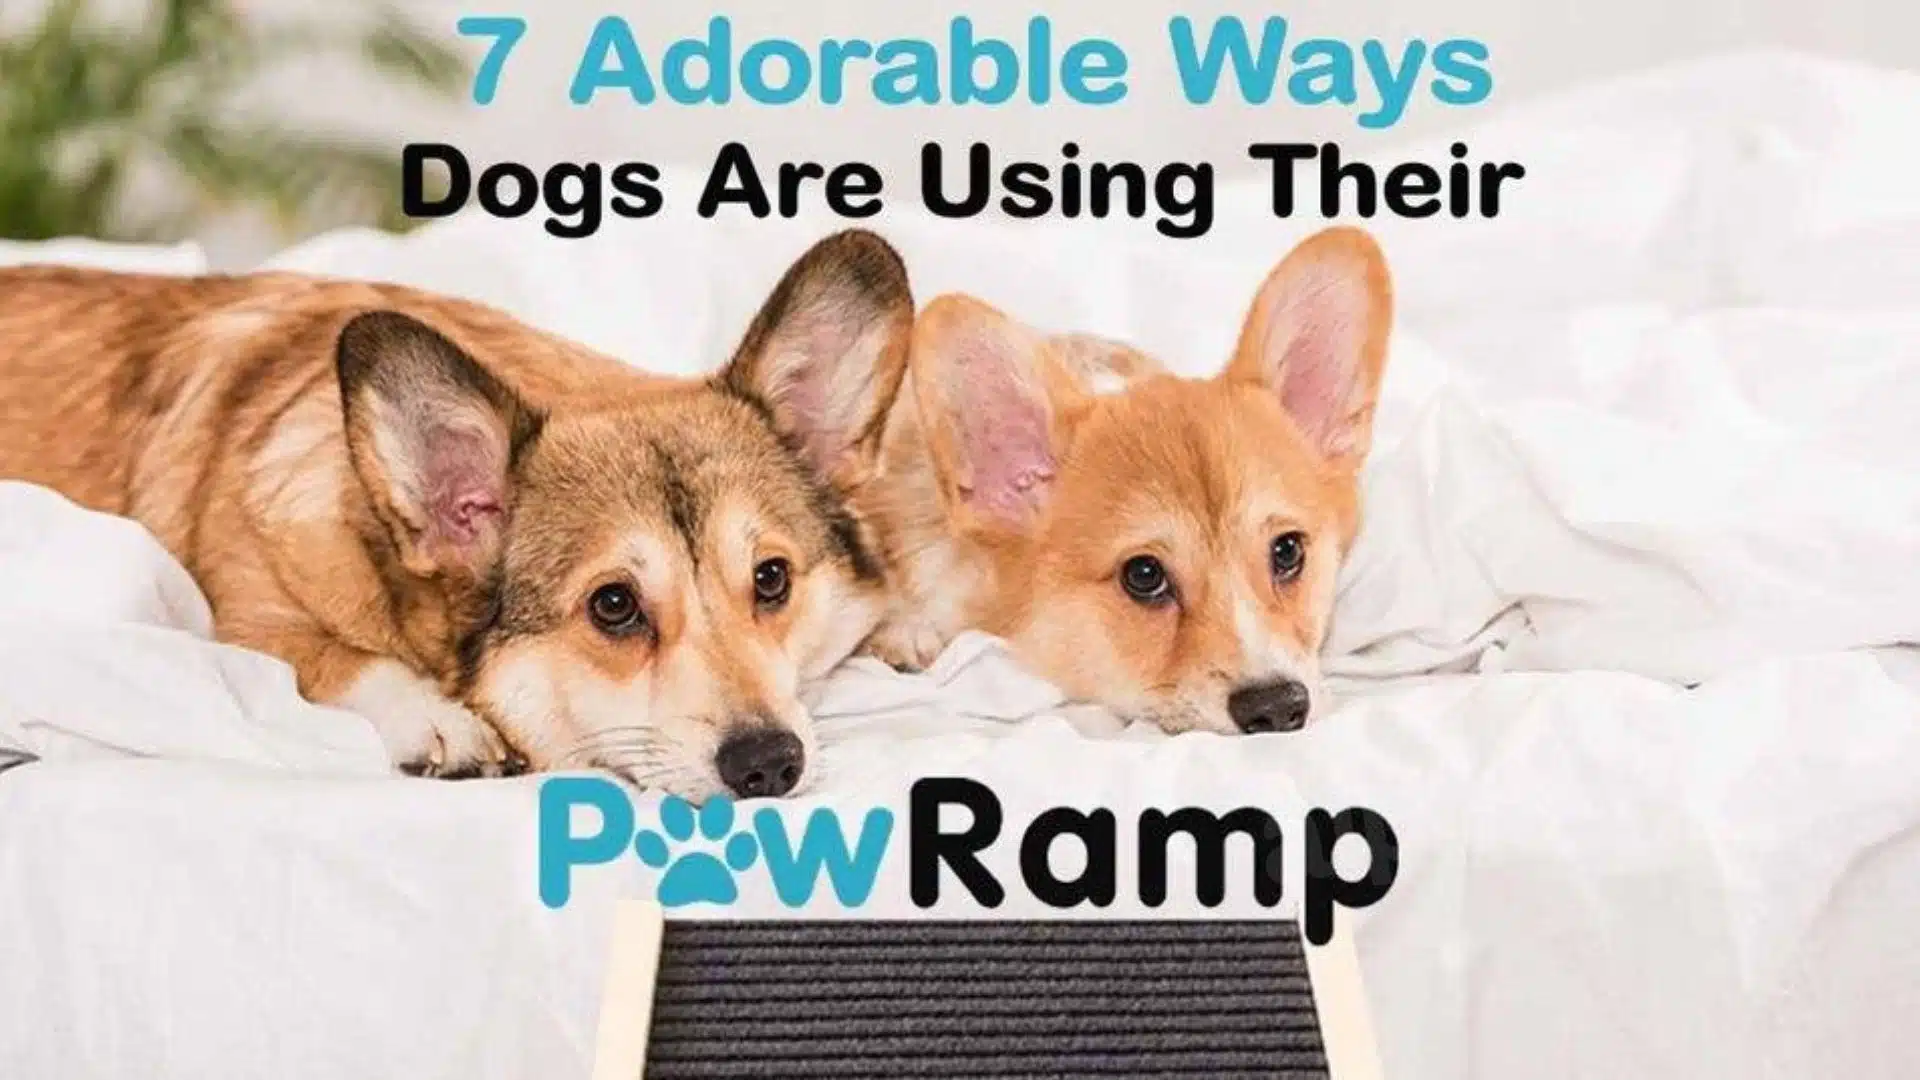 7 Adorable Ways Dogs are Using The PawRamp